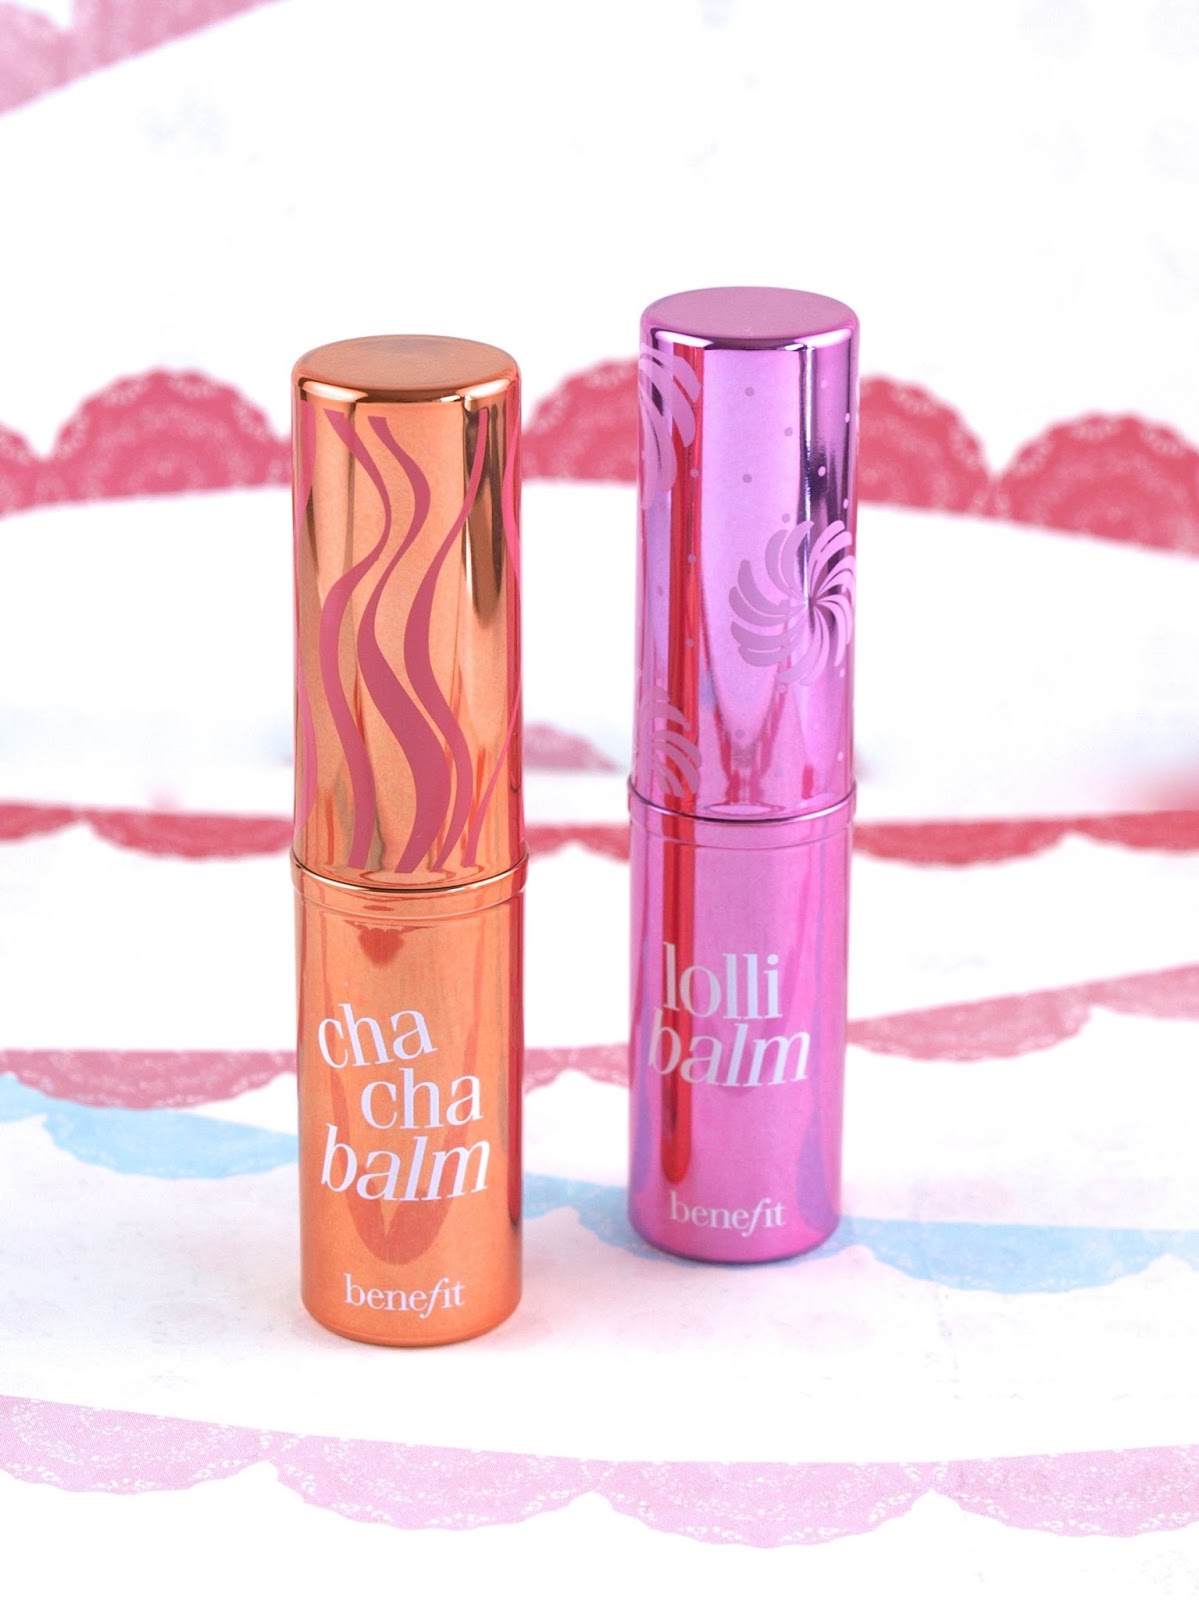 Benefit Cha Cha Balm & Lollibalm Hydrating Tinted Lip Balm: Review and Swatches